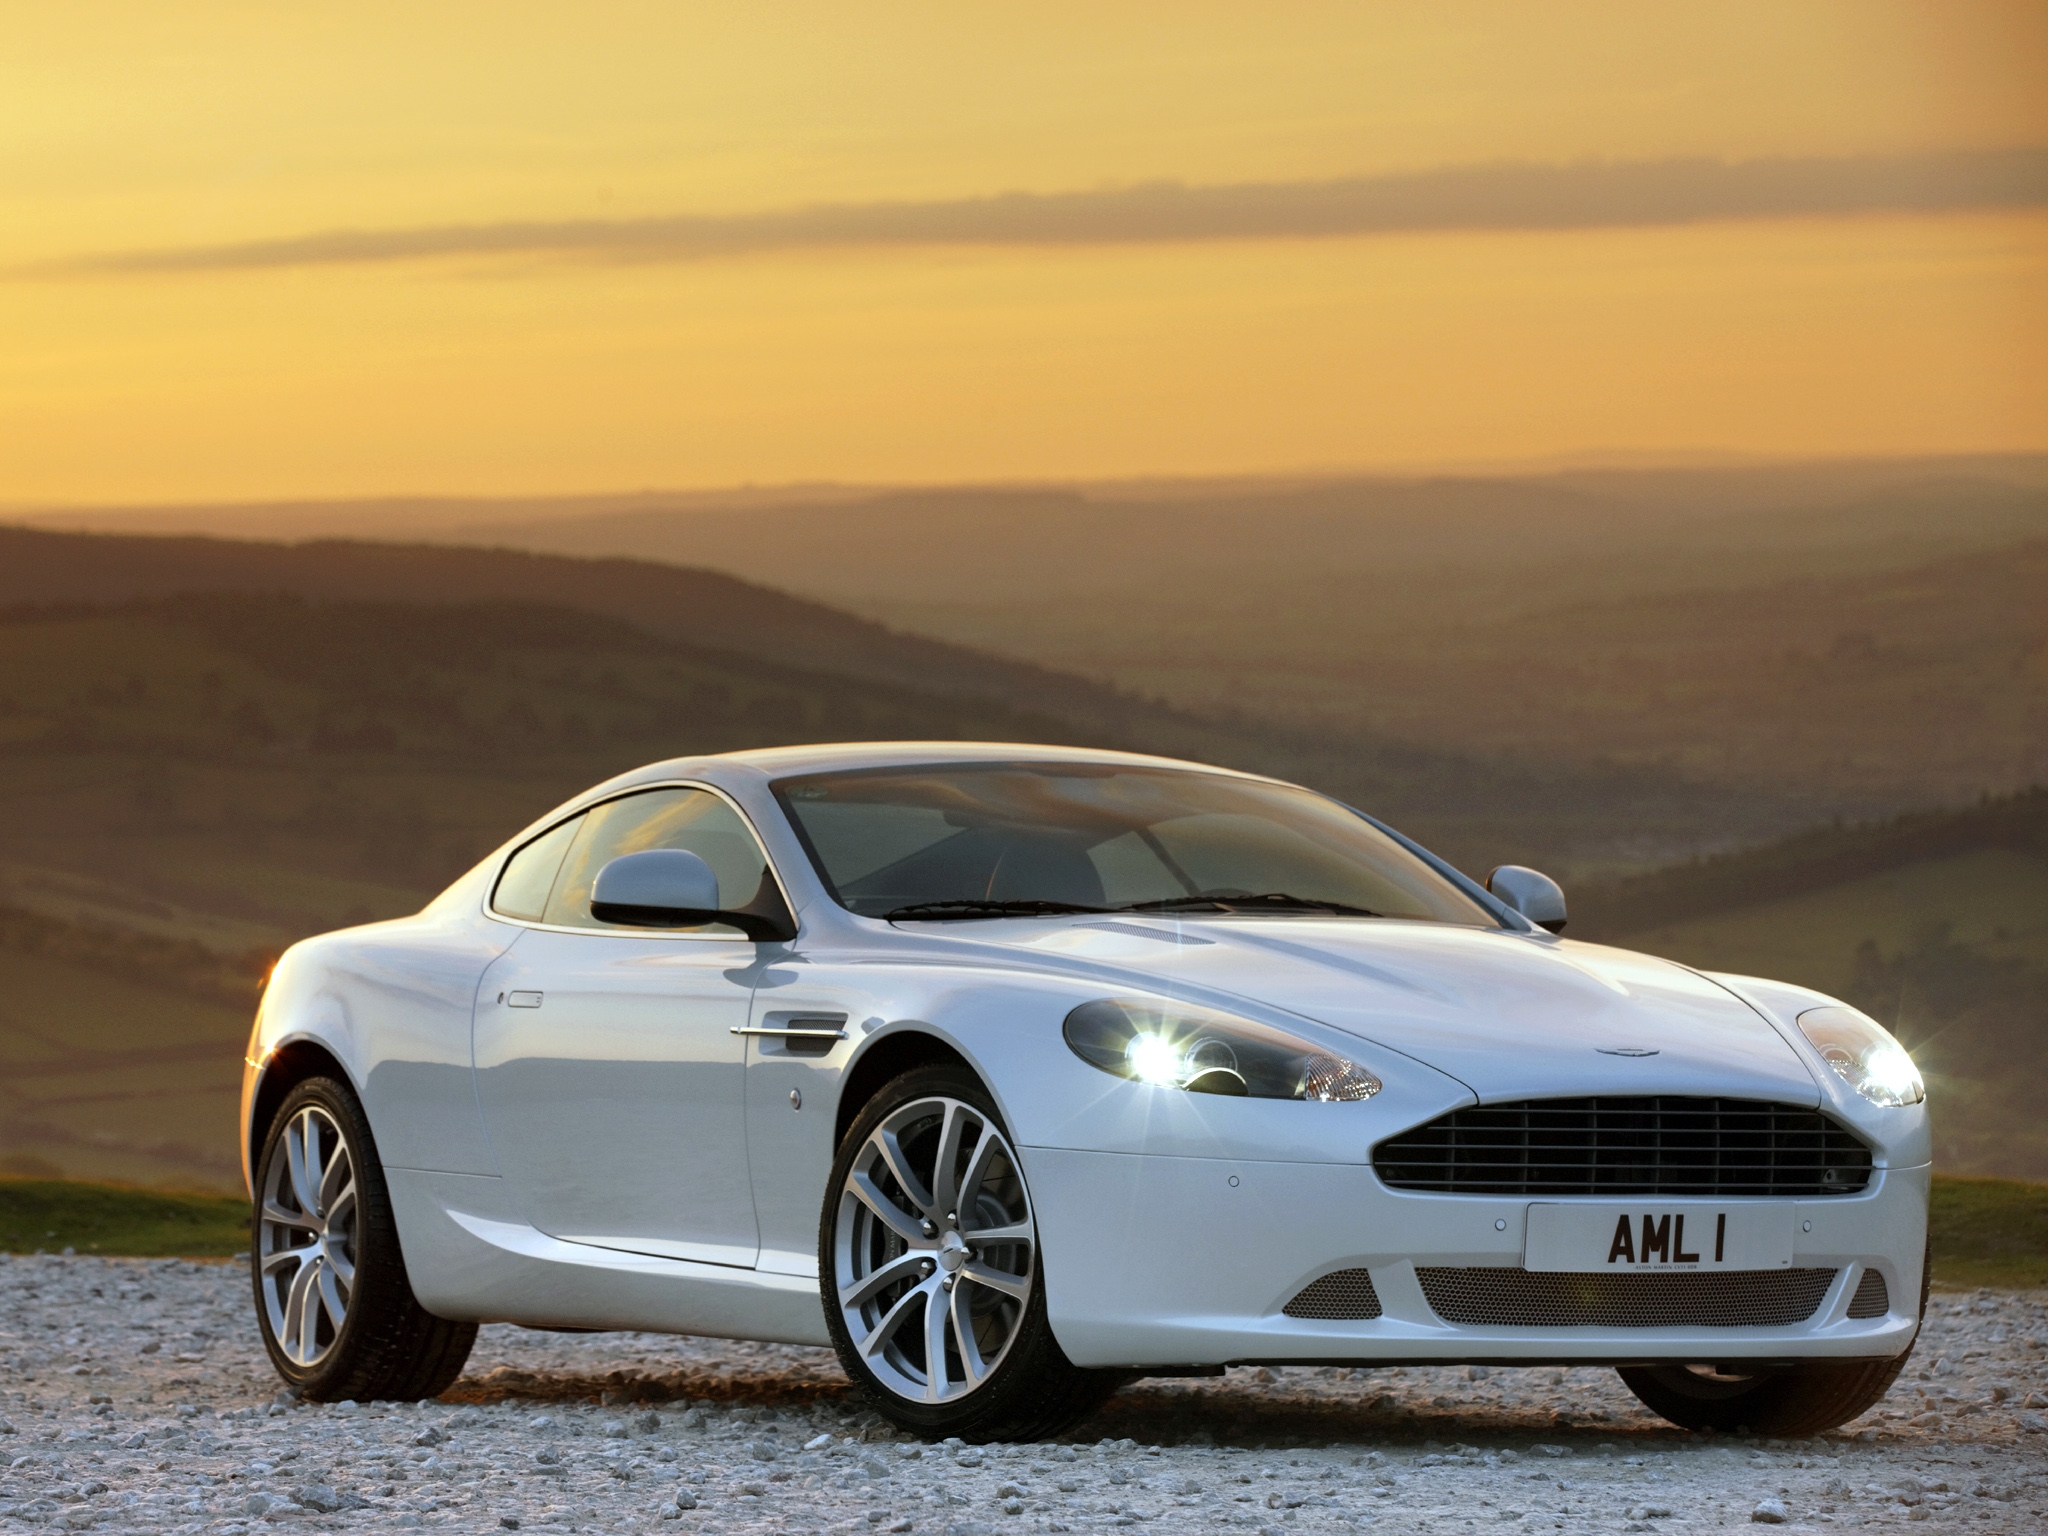 sports, auto, nature, sunset, aston martin, cars, white, side view, style, db9, 2010